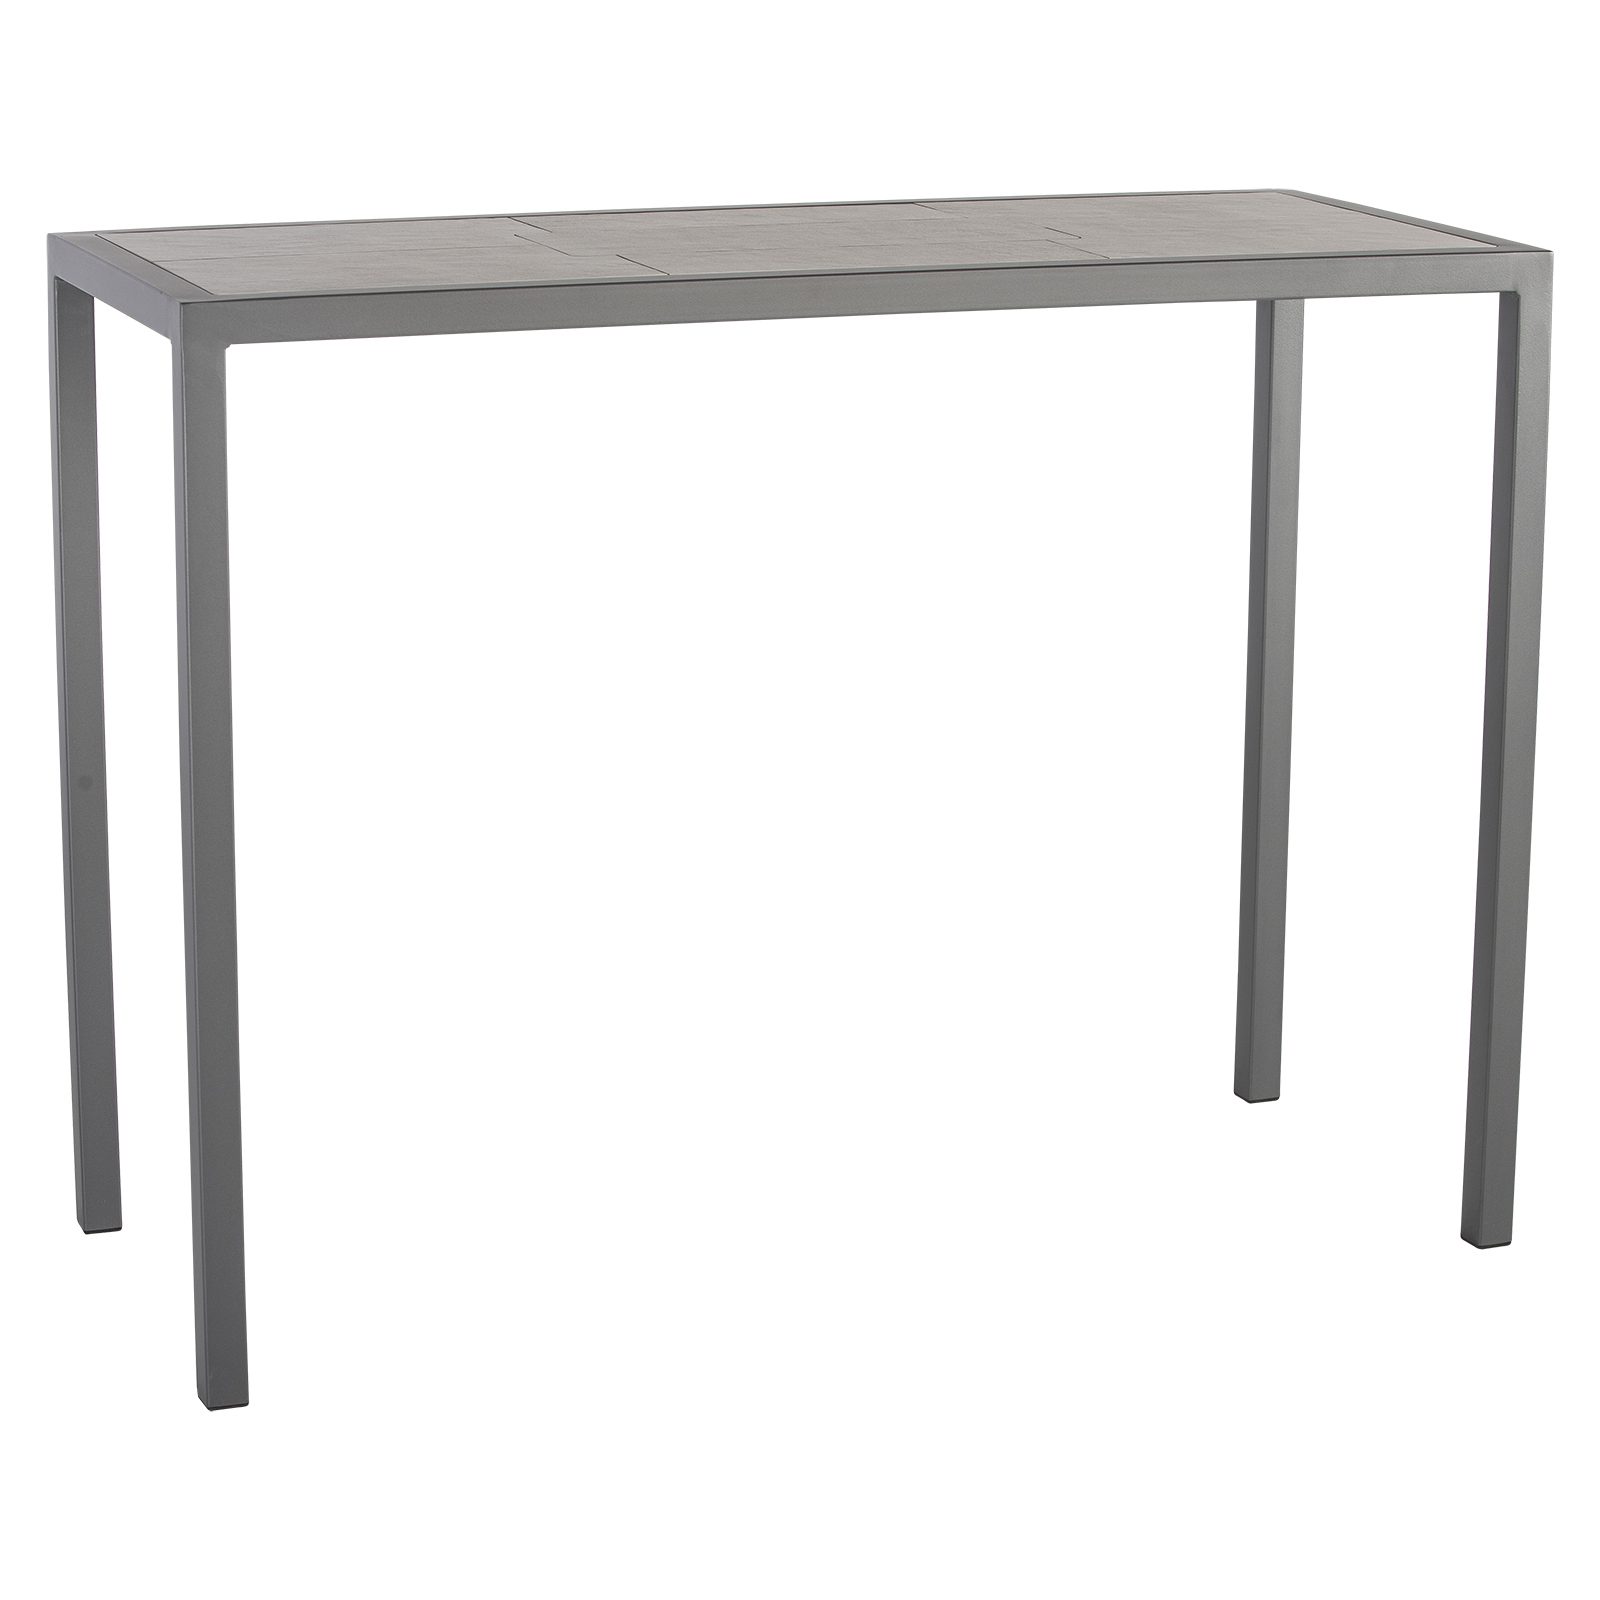 21" x 57" Counter Table - Fully Welded Tables - Quadra Iron Tables 109